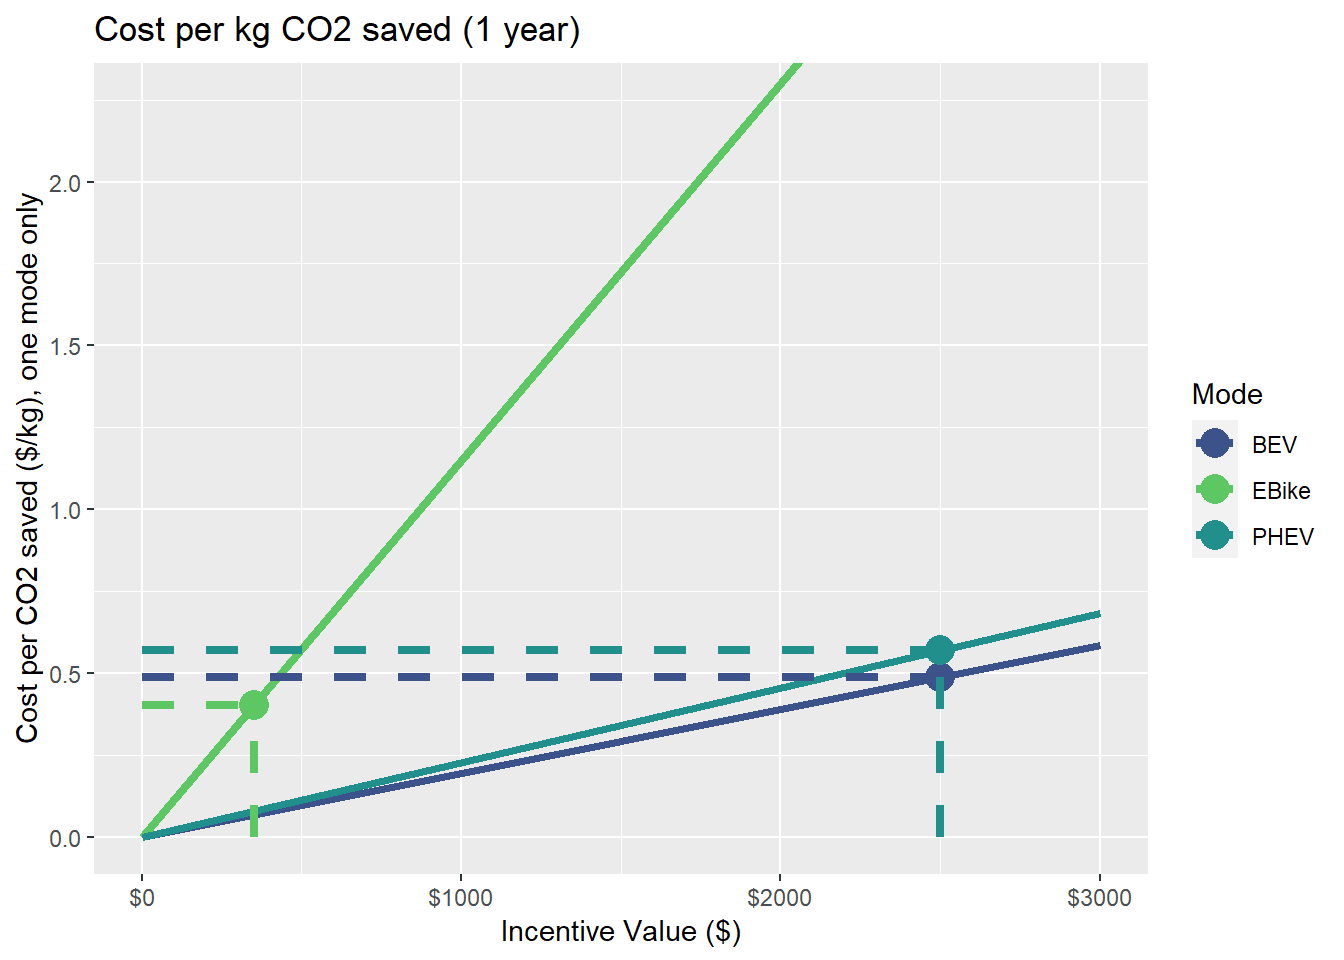 This plot displays the total cost per kilogram of CO2 saved over the course of one year. E-bikes cost $0.40, battery electric vehicles cost $0.49 per kg saved, and plug-in hybrid electric vehicles cost $0.57 per kg saved.